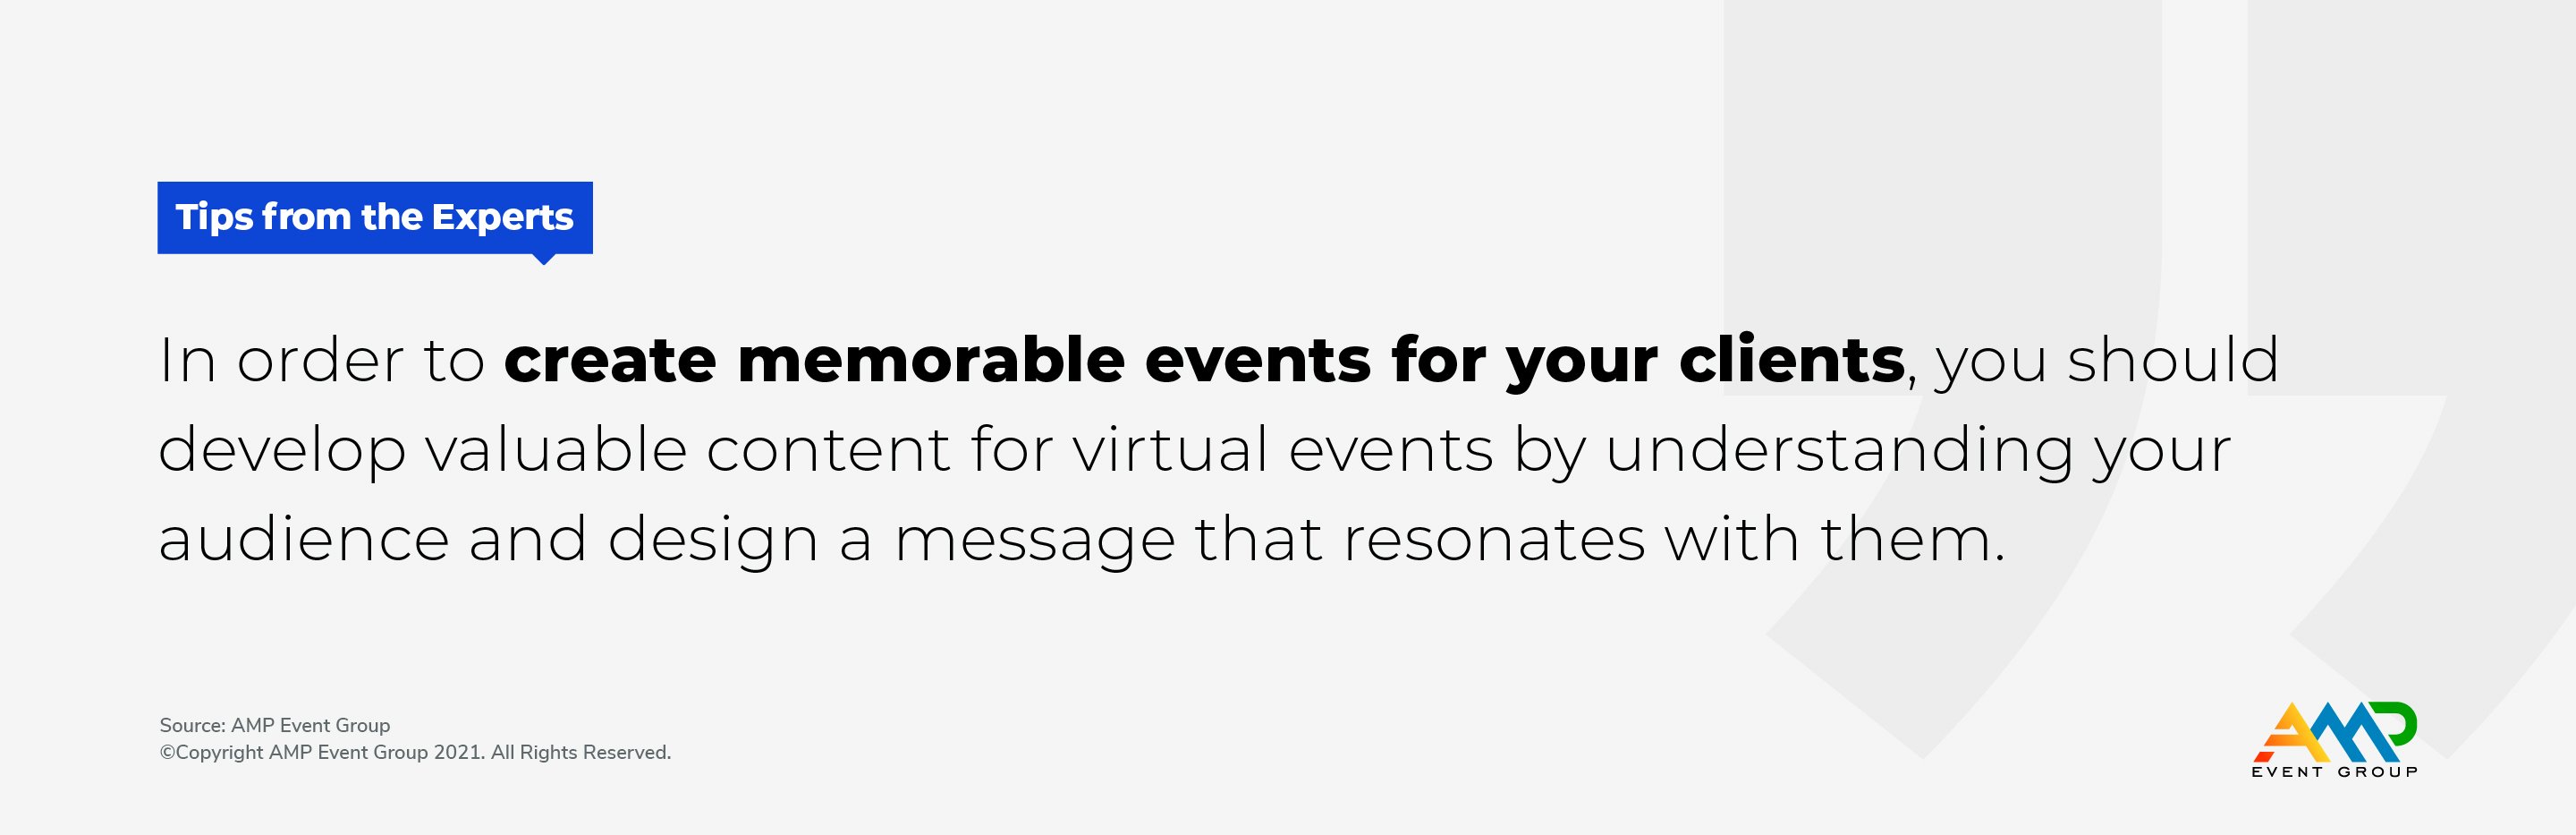 Virtual Event Content Trends memorable events for clients